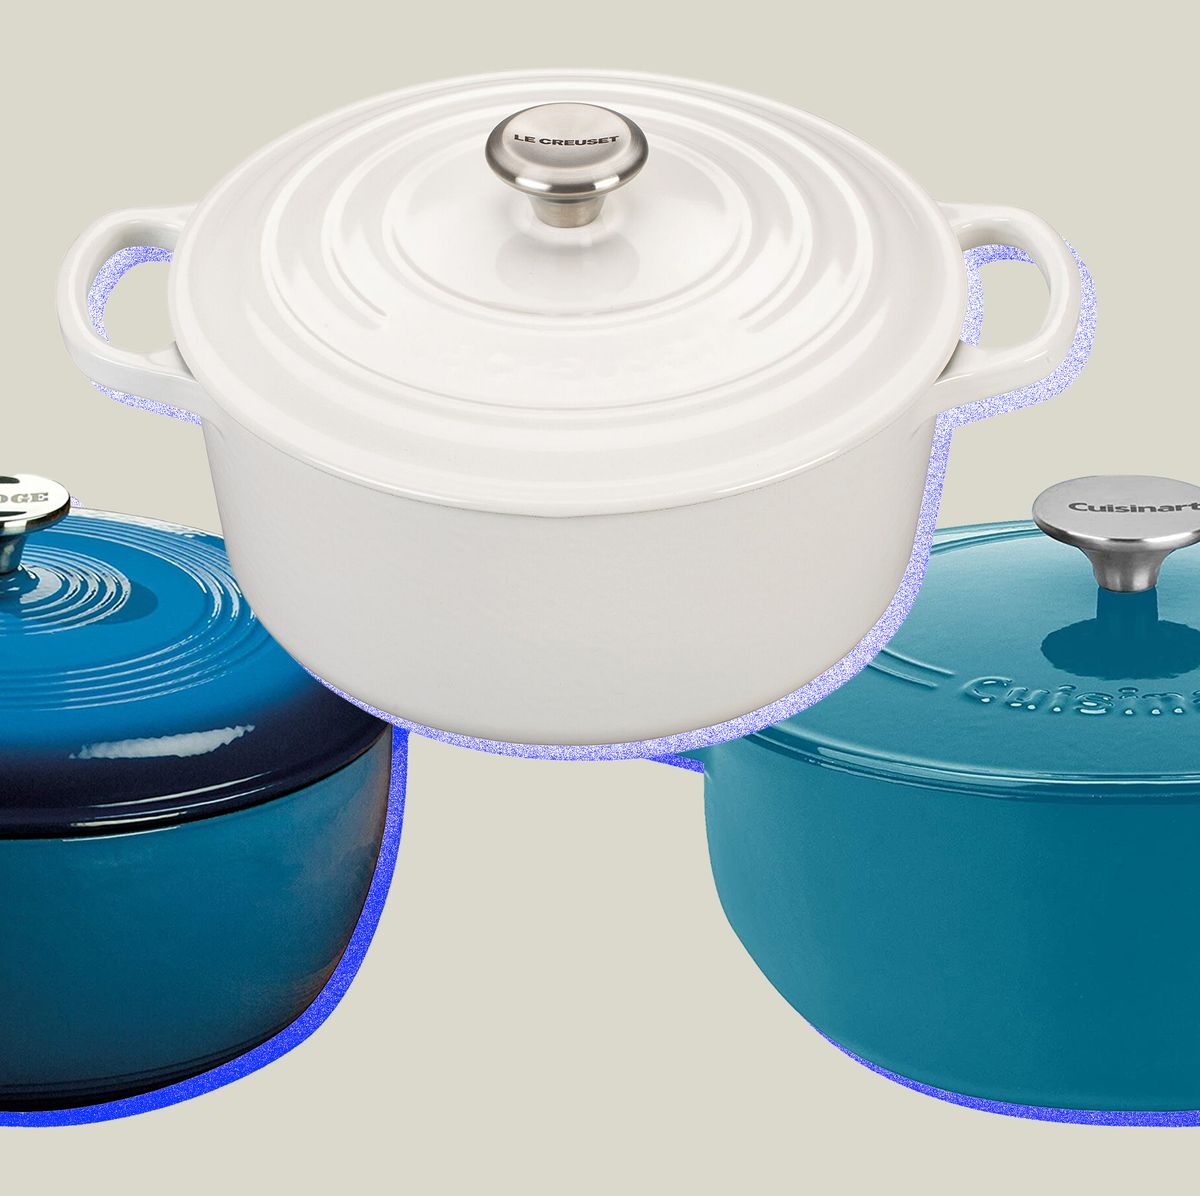 Lodge makes some of the best cast iron Dutch ovens, now starting